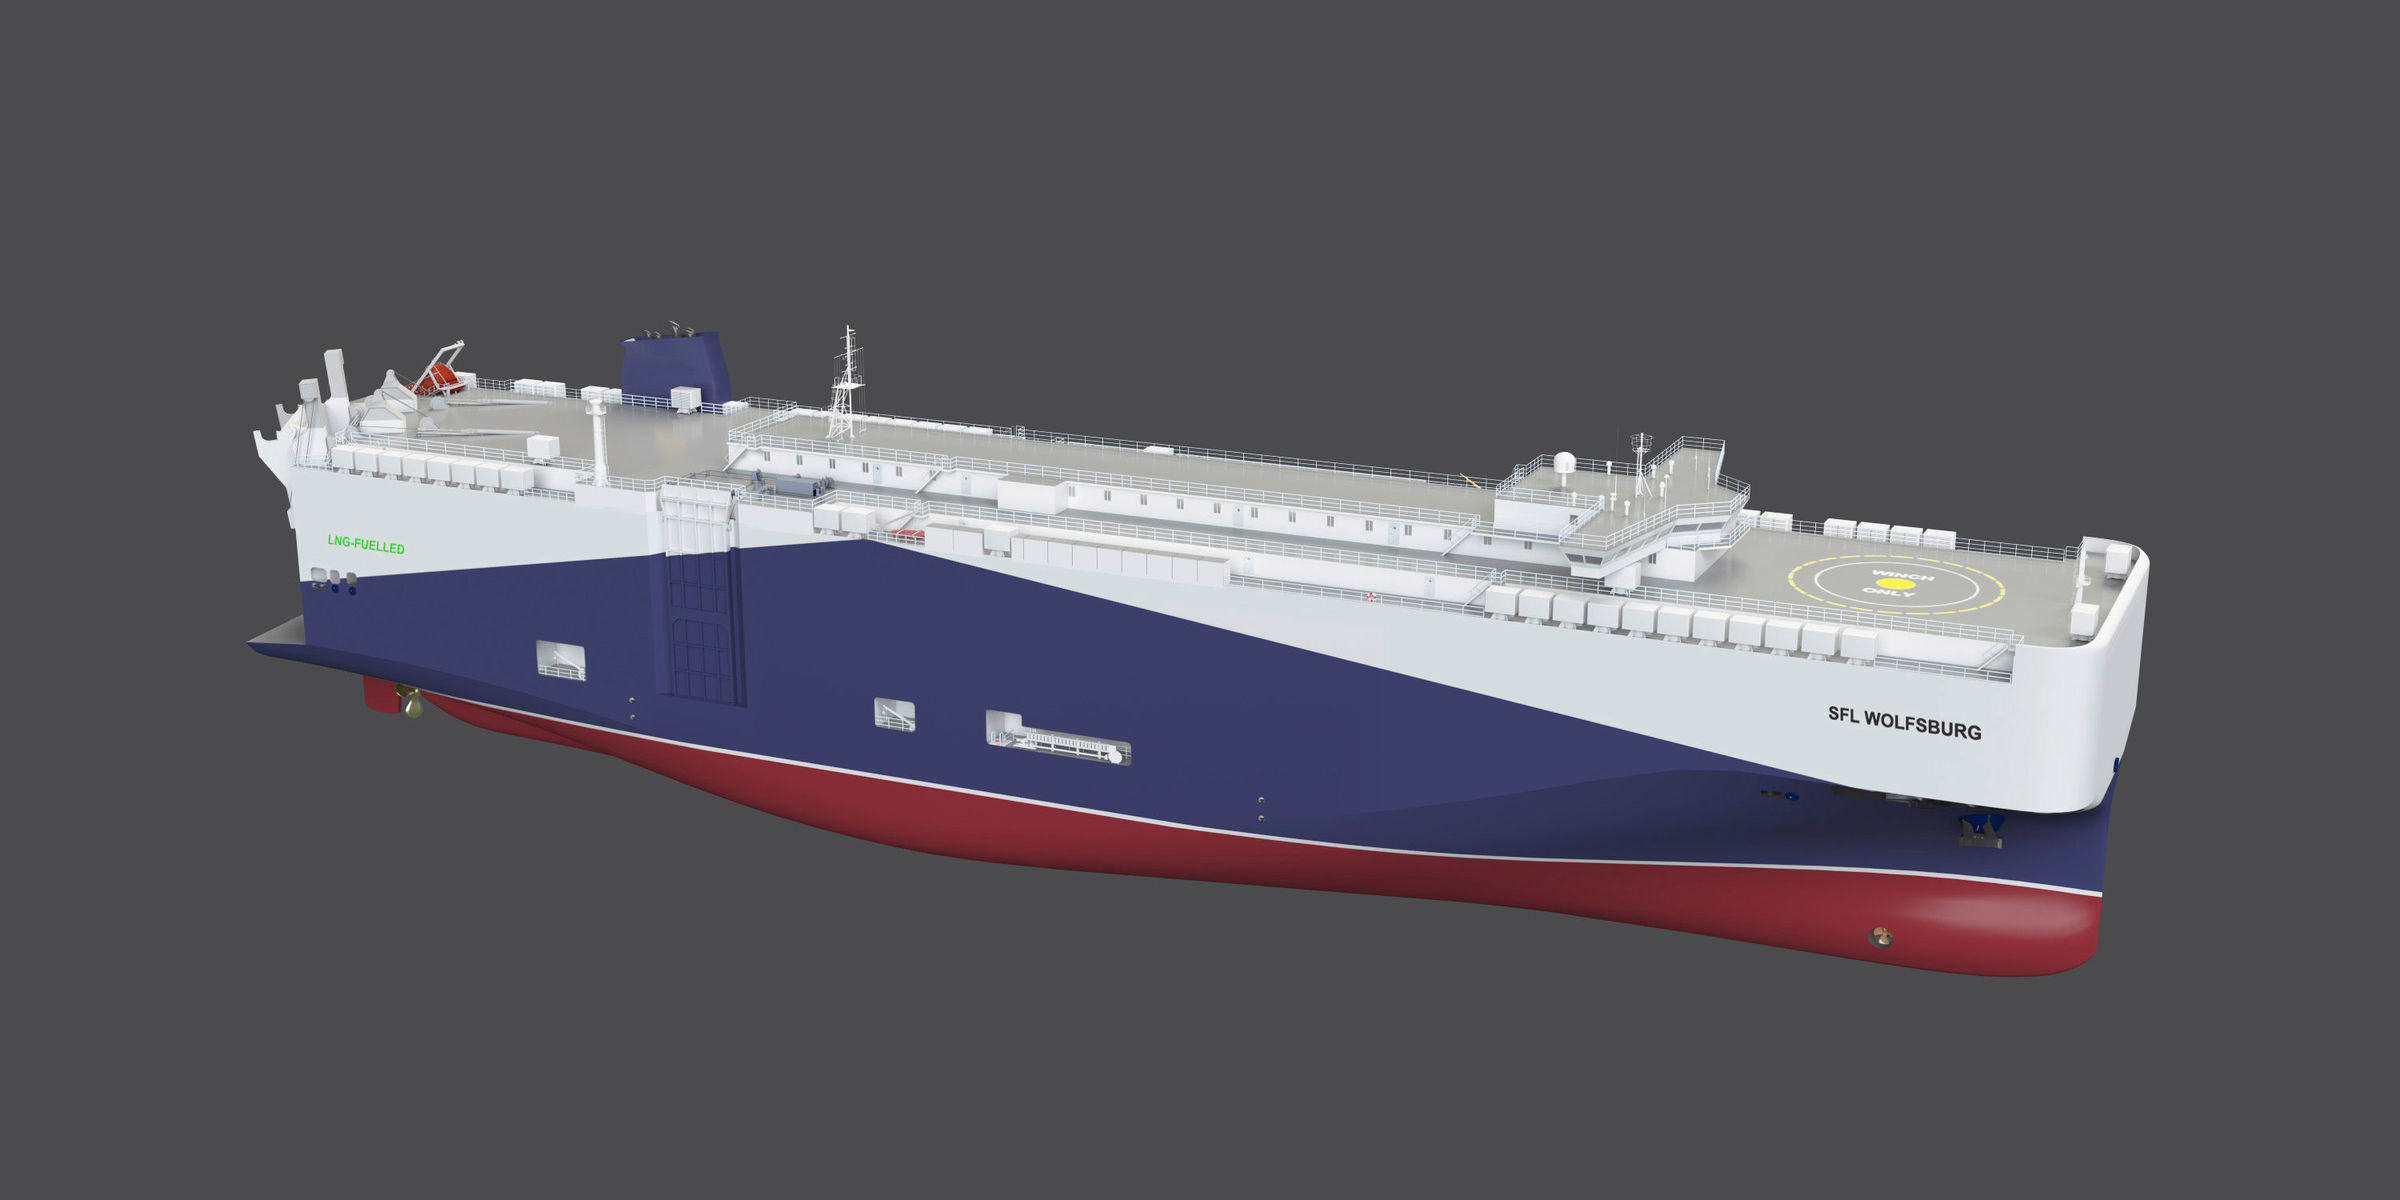 Volkswagen to replace 4 diesel ships with LNG vessels